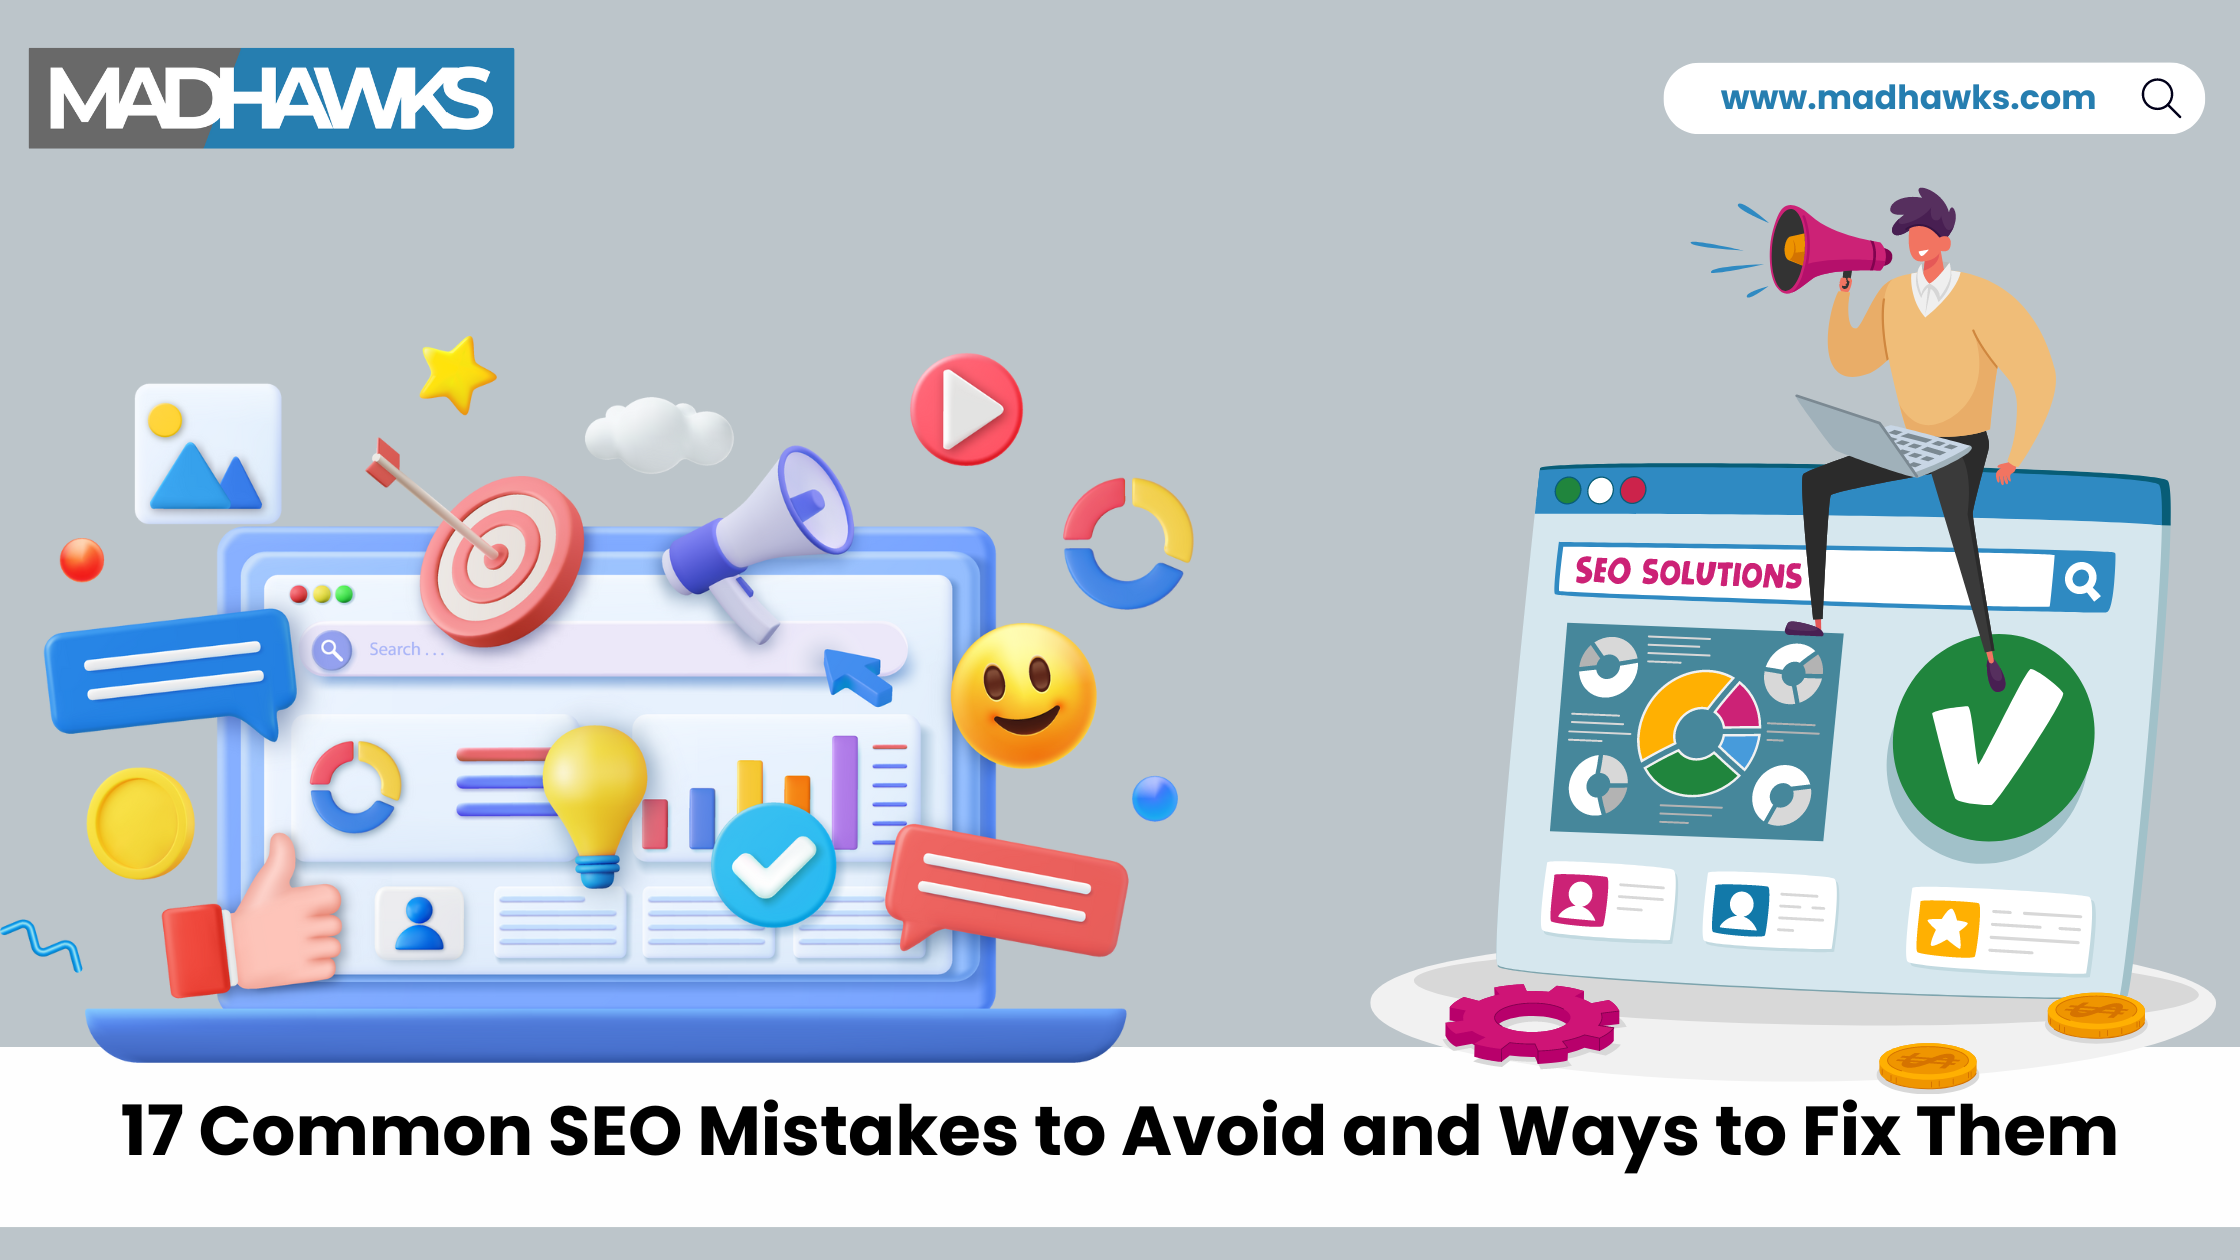 17 Common SEO Mistakes to Avoid and Ways to Fix Them